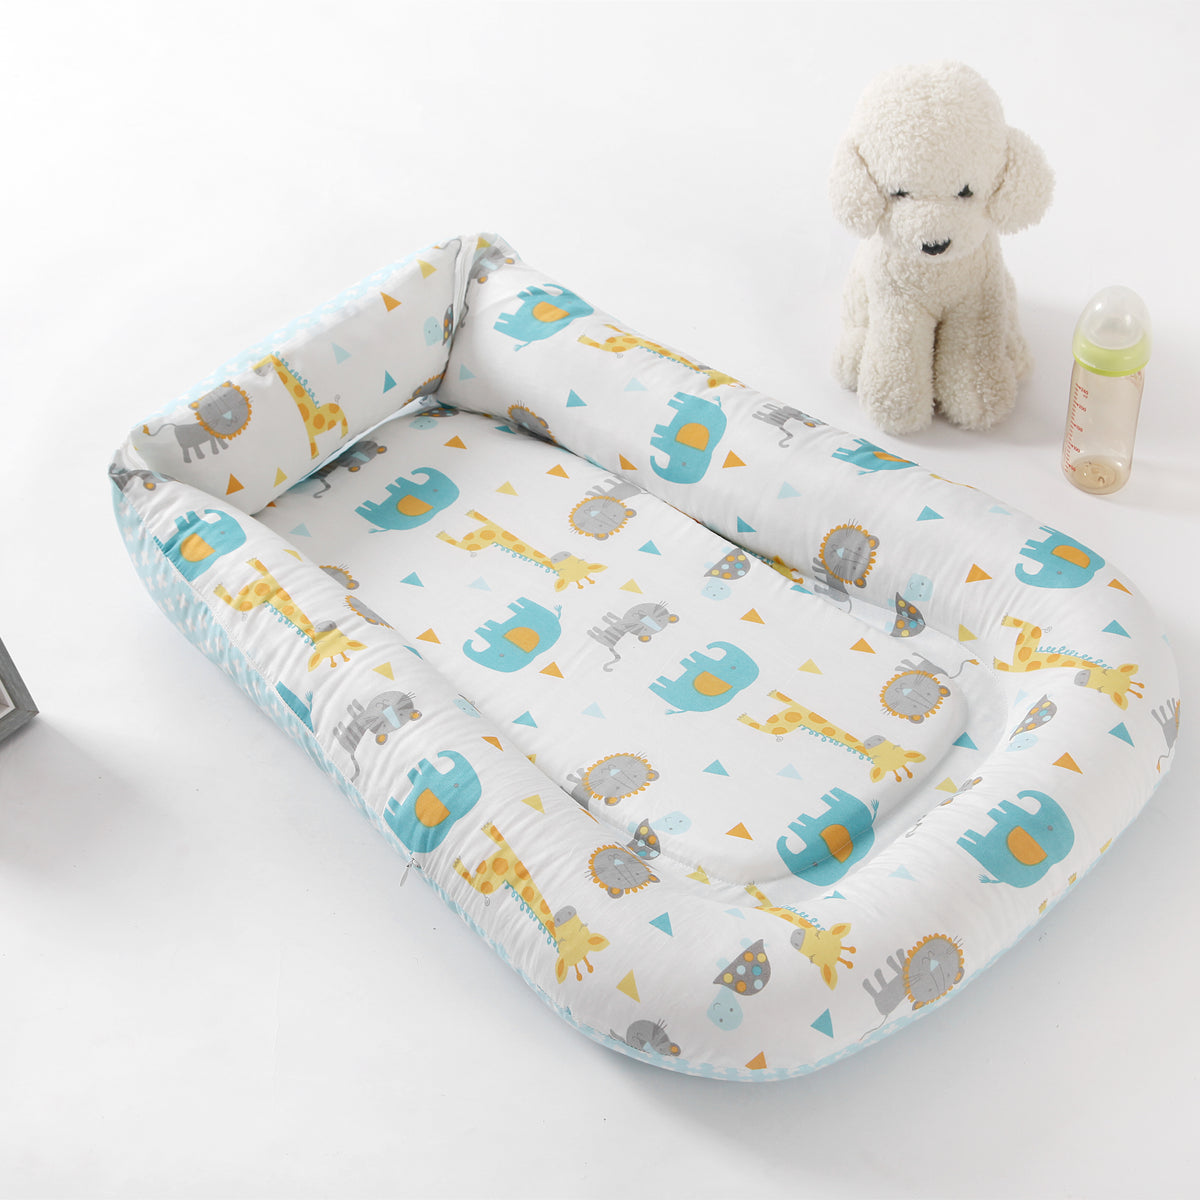 Baby Lounger for Newborns (Zoo)